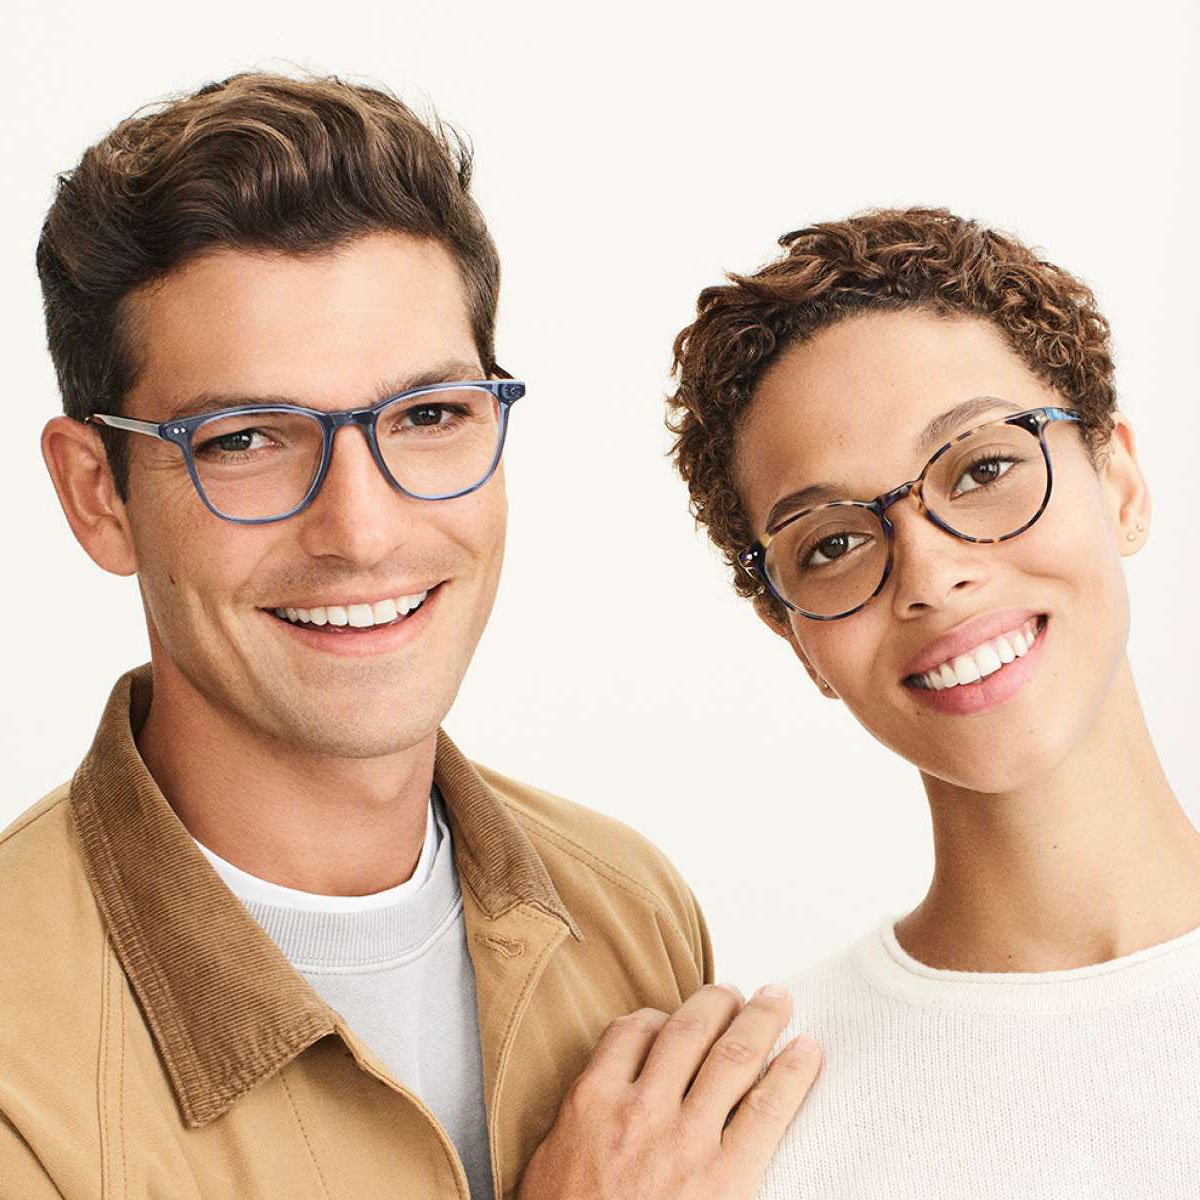 Smiling man and woman wearing glasses